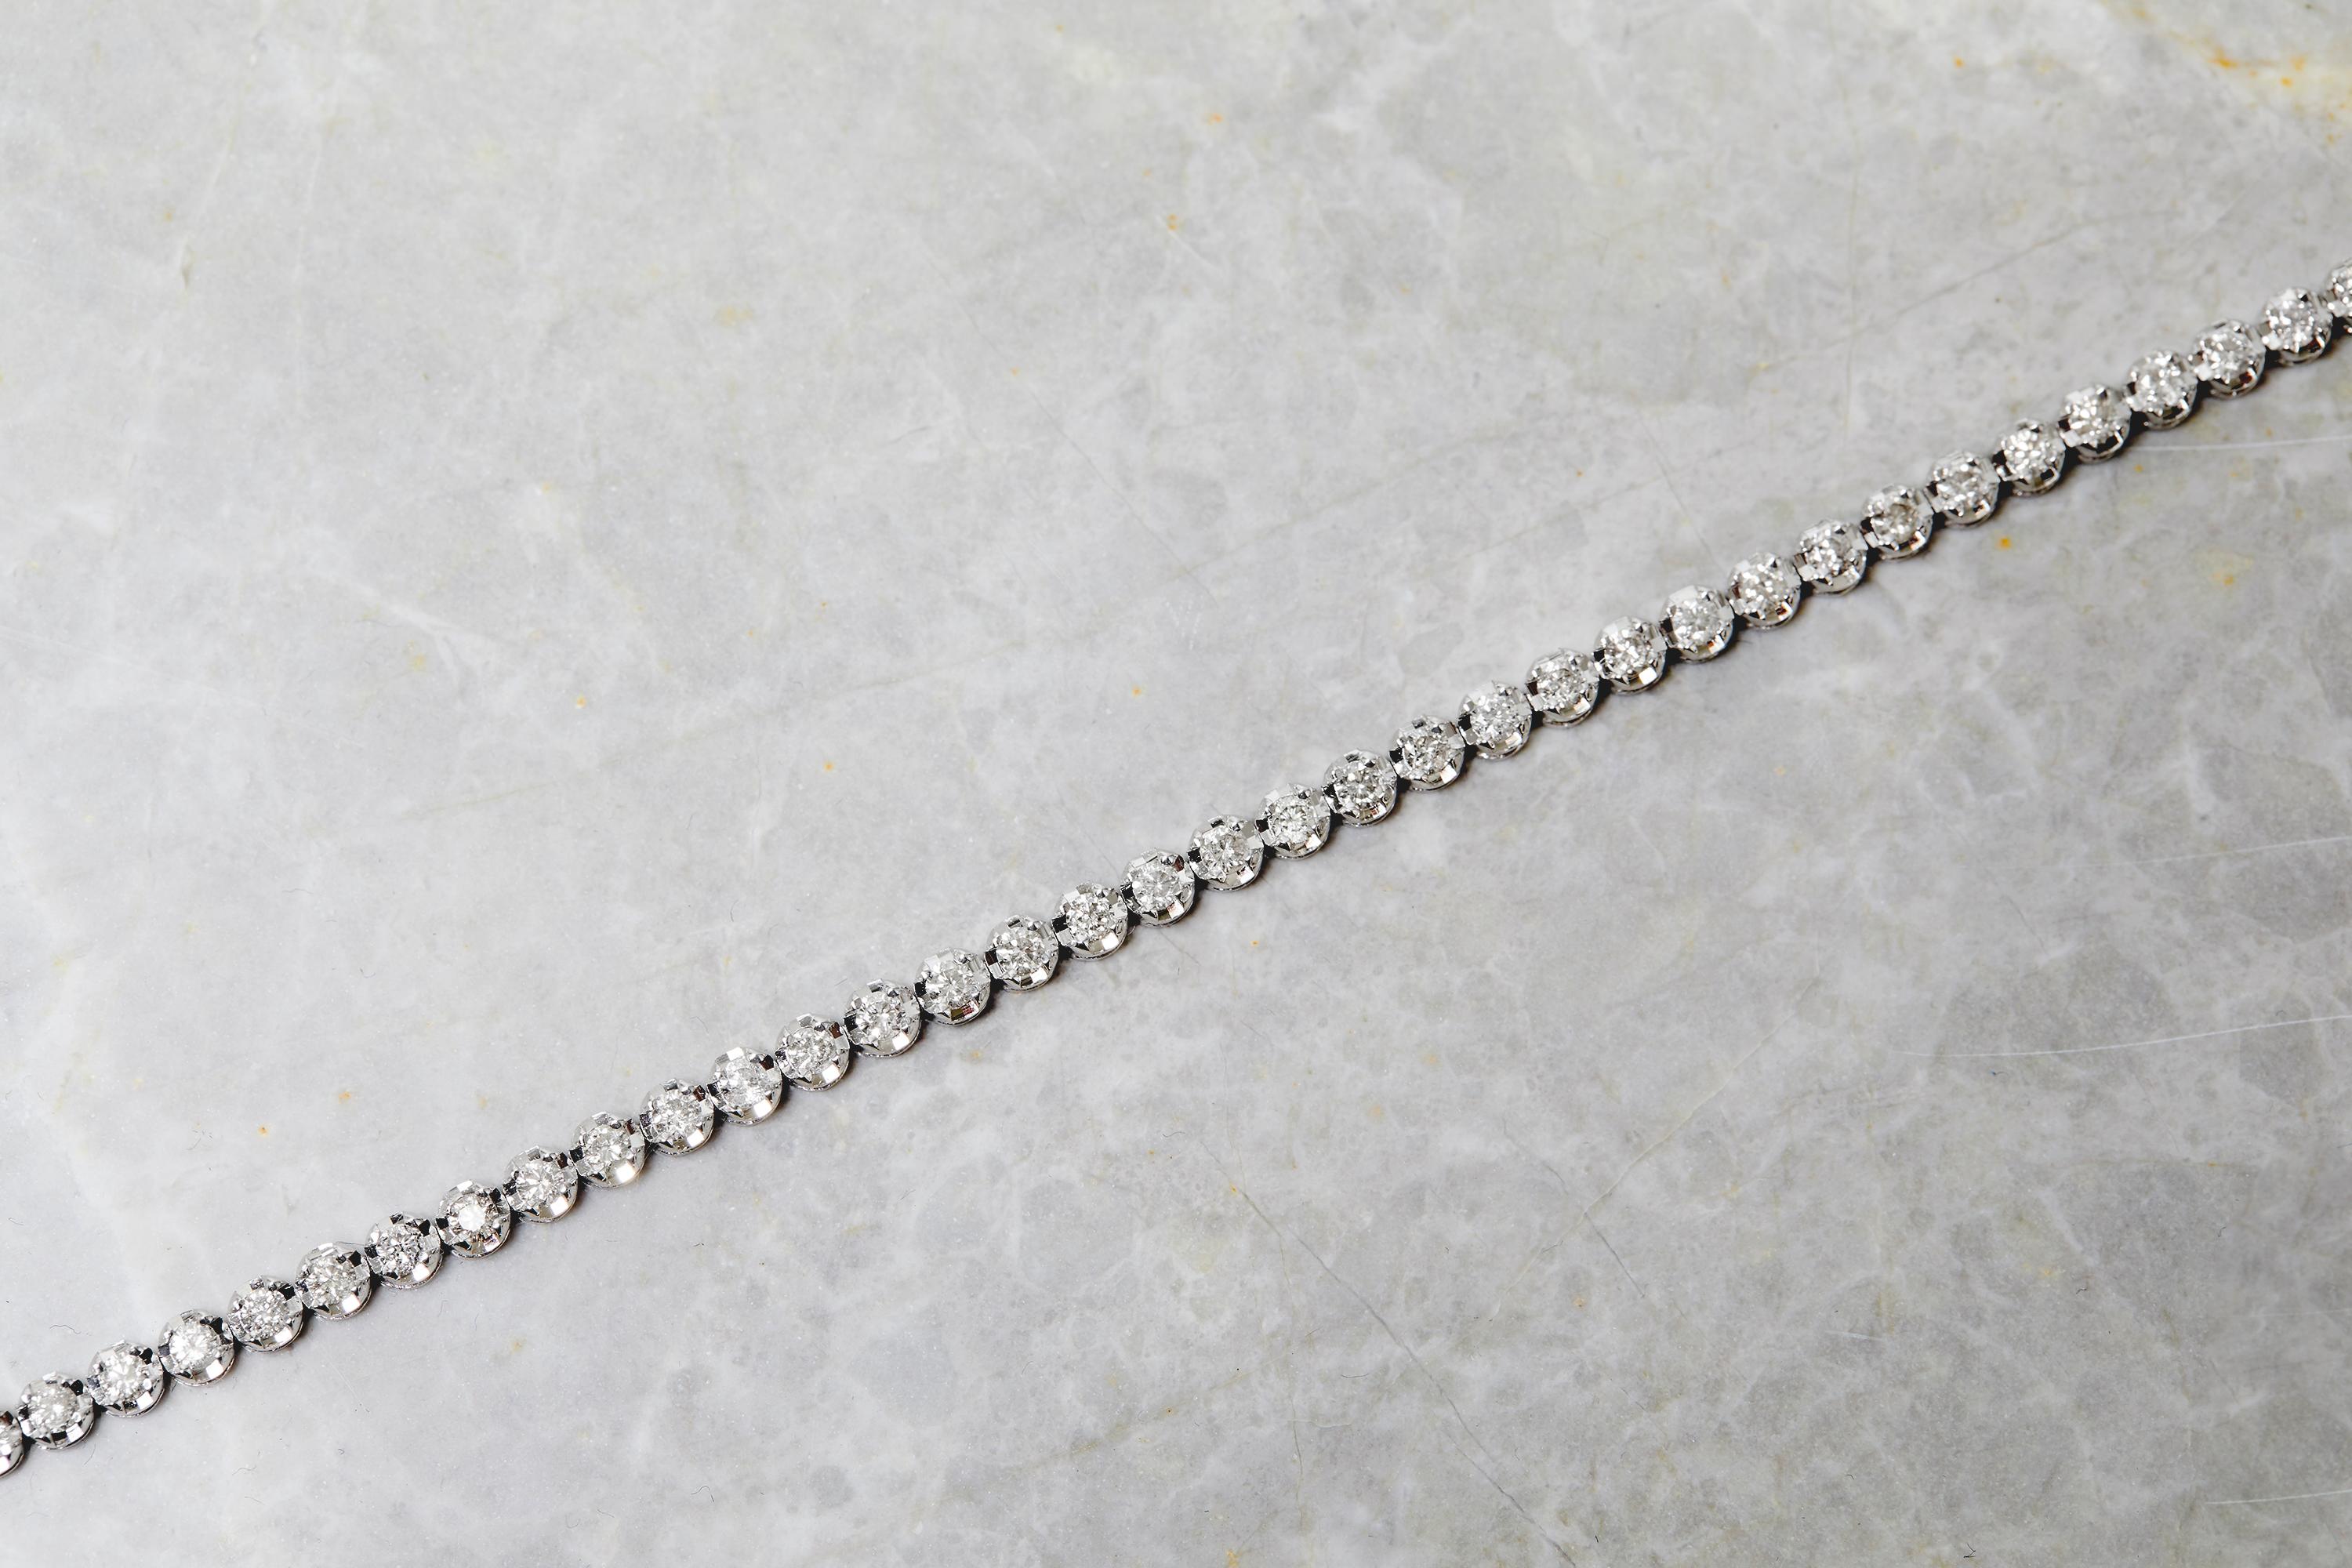 The most classic and coveted of jewellery items, the tennis bracelet. We just launched a new collection of tennis bracelets designed to look big and bright, and come in at a reasonable price. We have them in 3 sizes. The smallest, the 1ct bracelet